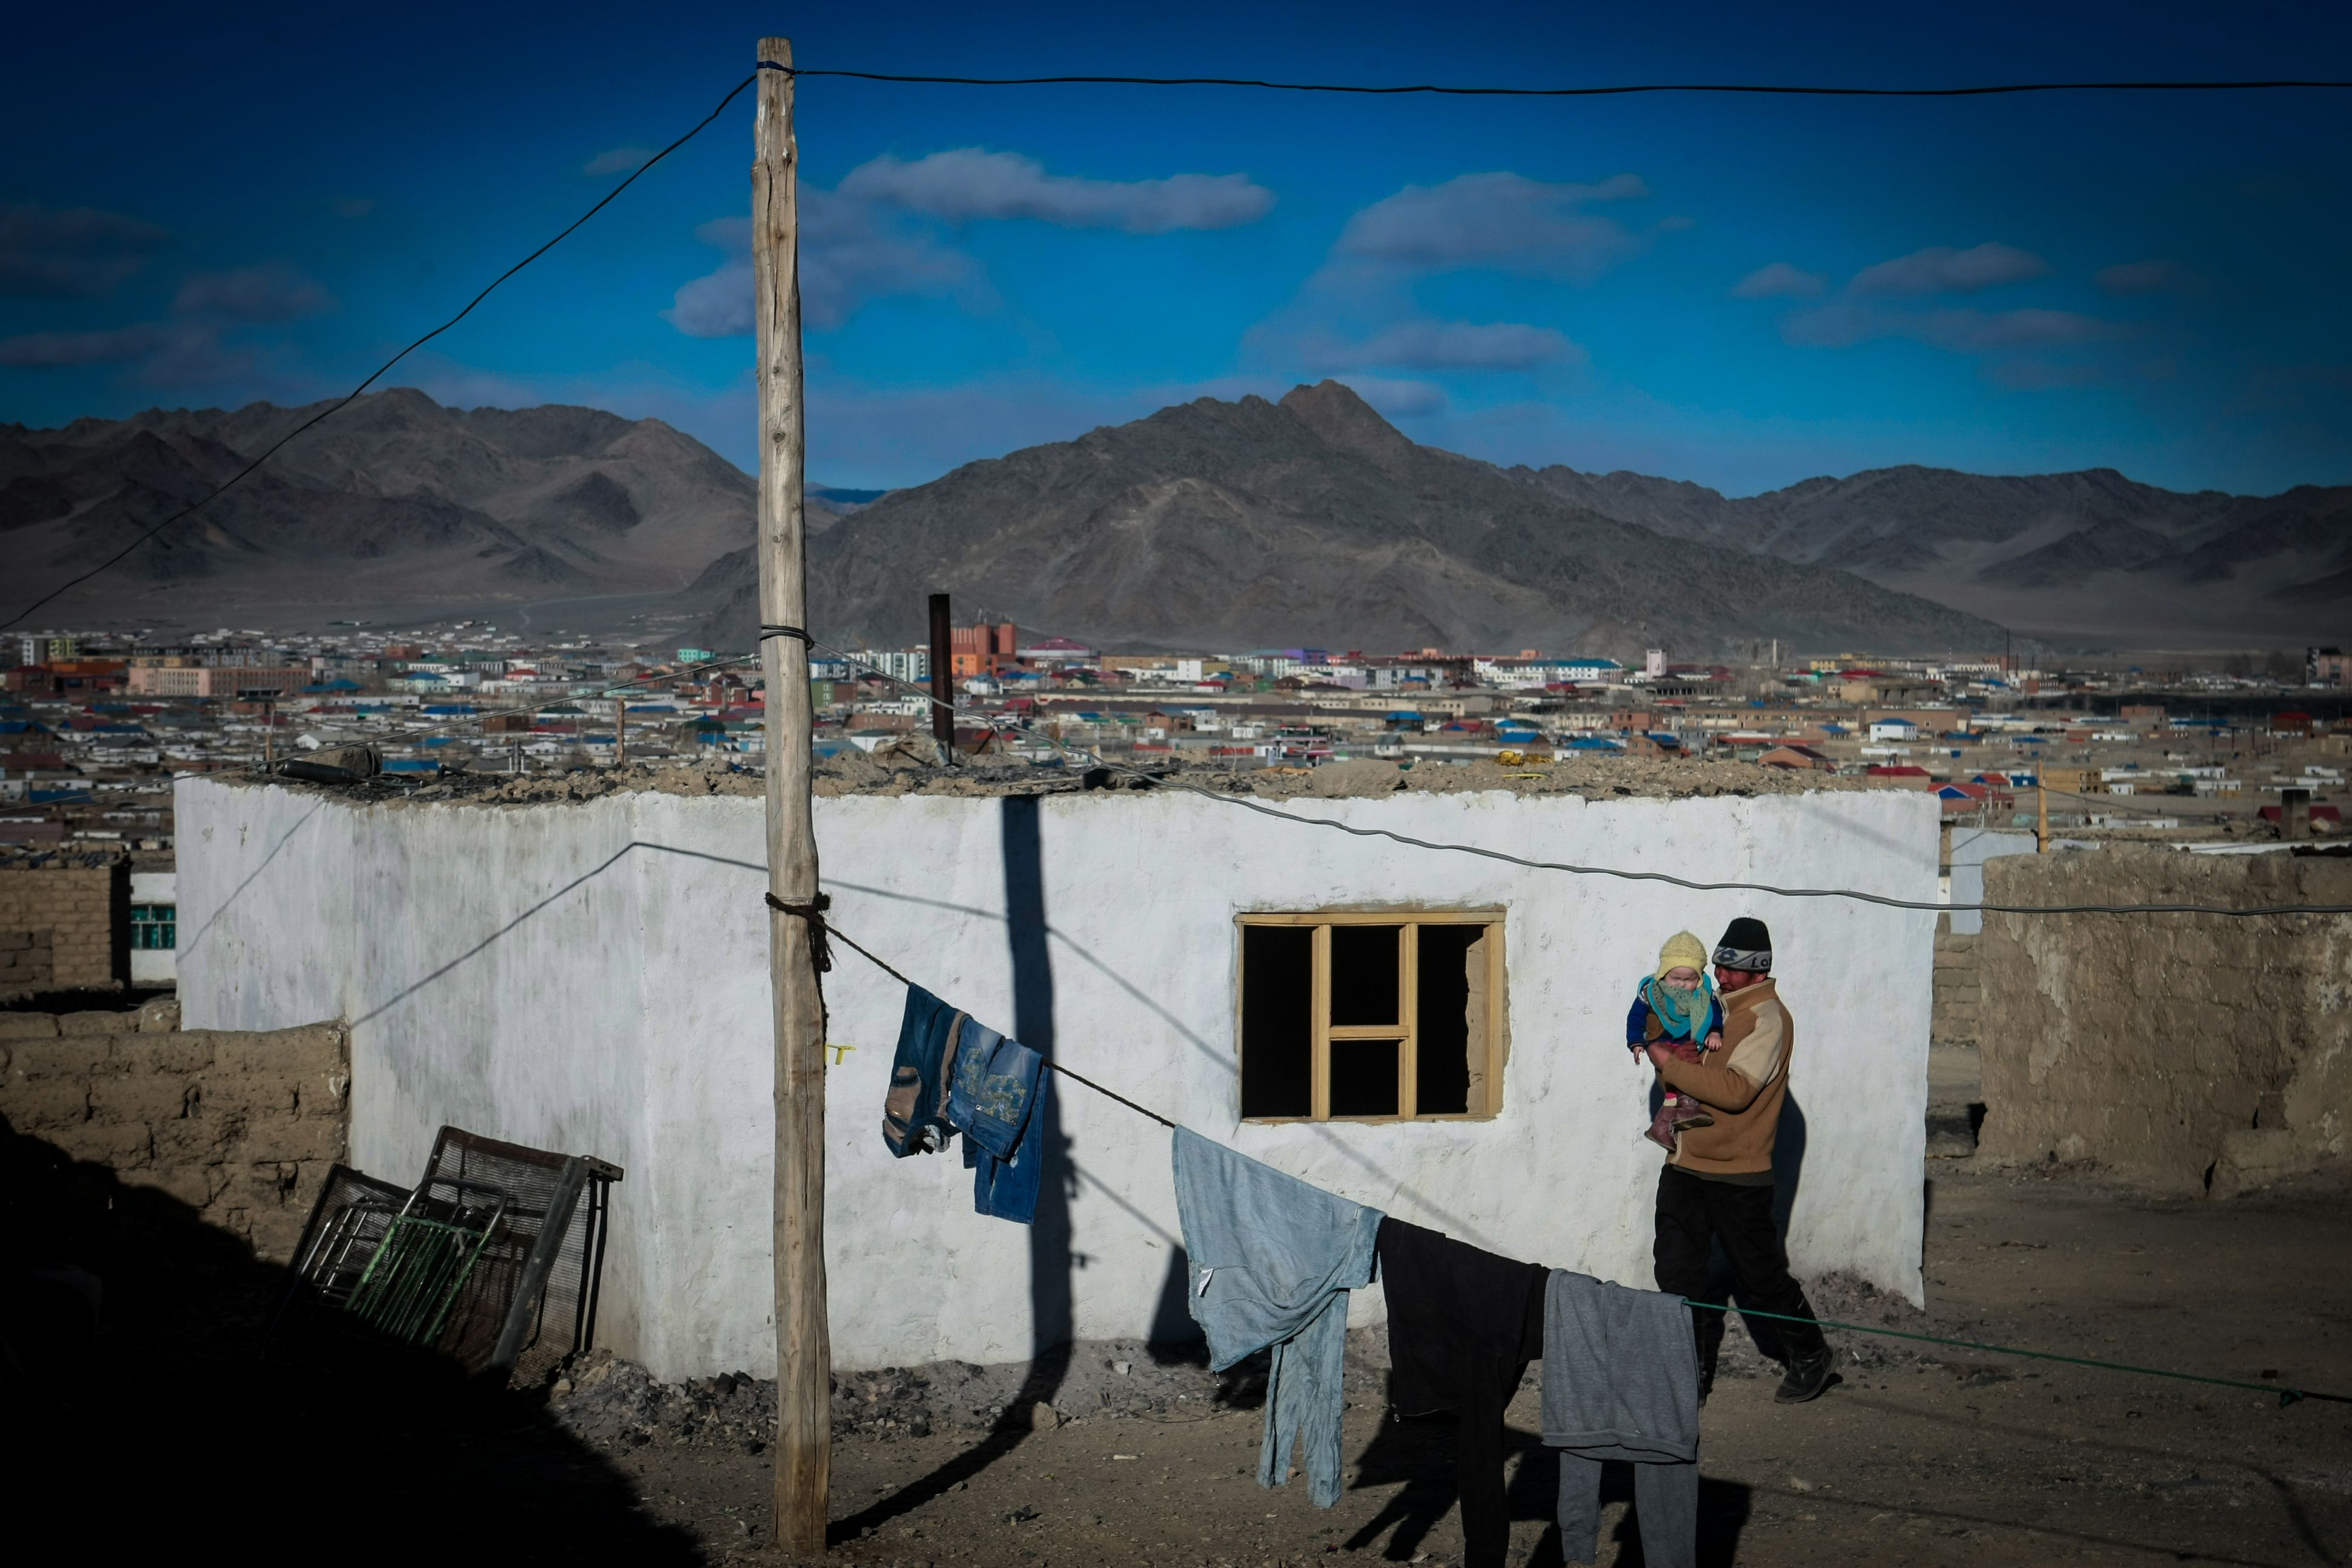 TOPSHOT - This photo taken on March 4, 2014 shows a man carrying a child in the center of Bayan-Ulgii, in Ulgii soum, in Mongolia. - (BYAMBASUREN BYAMBA-OCHIR/AFP via Getty Images)